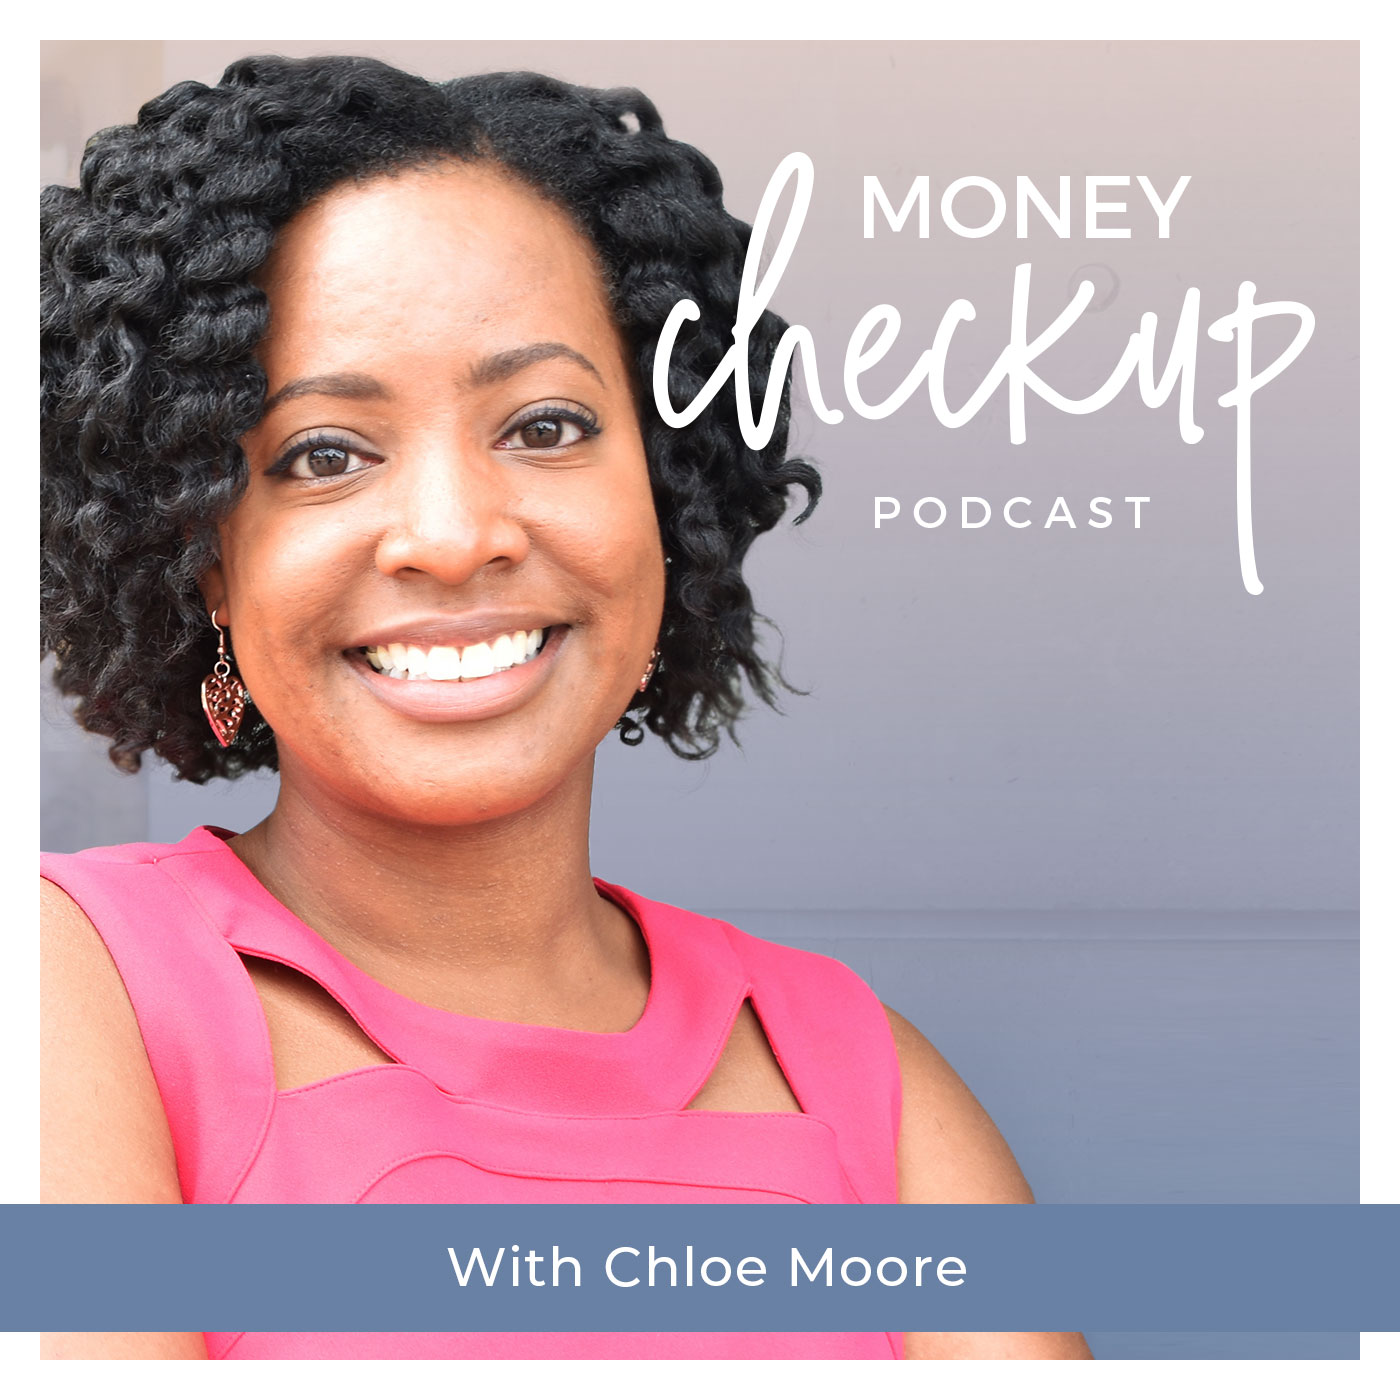 Money Checkup Podcast With Chloe Moore